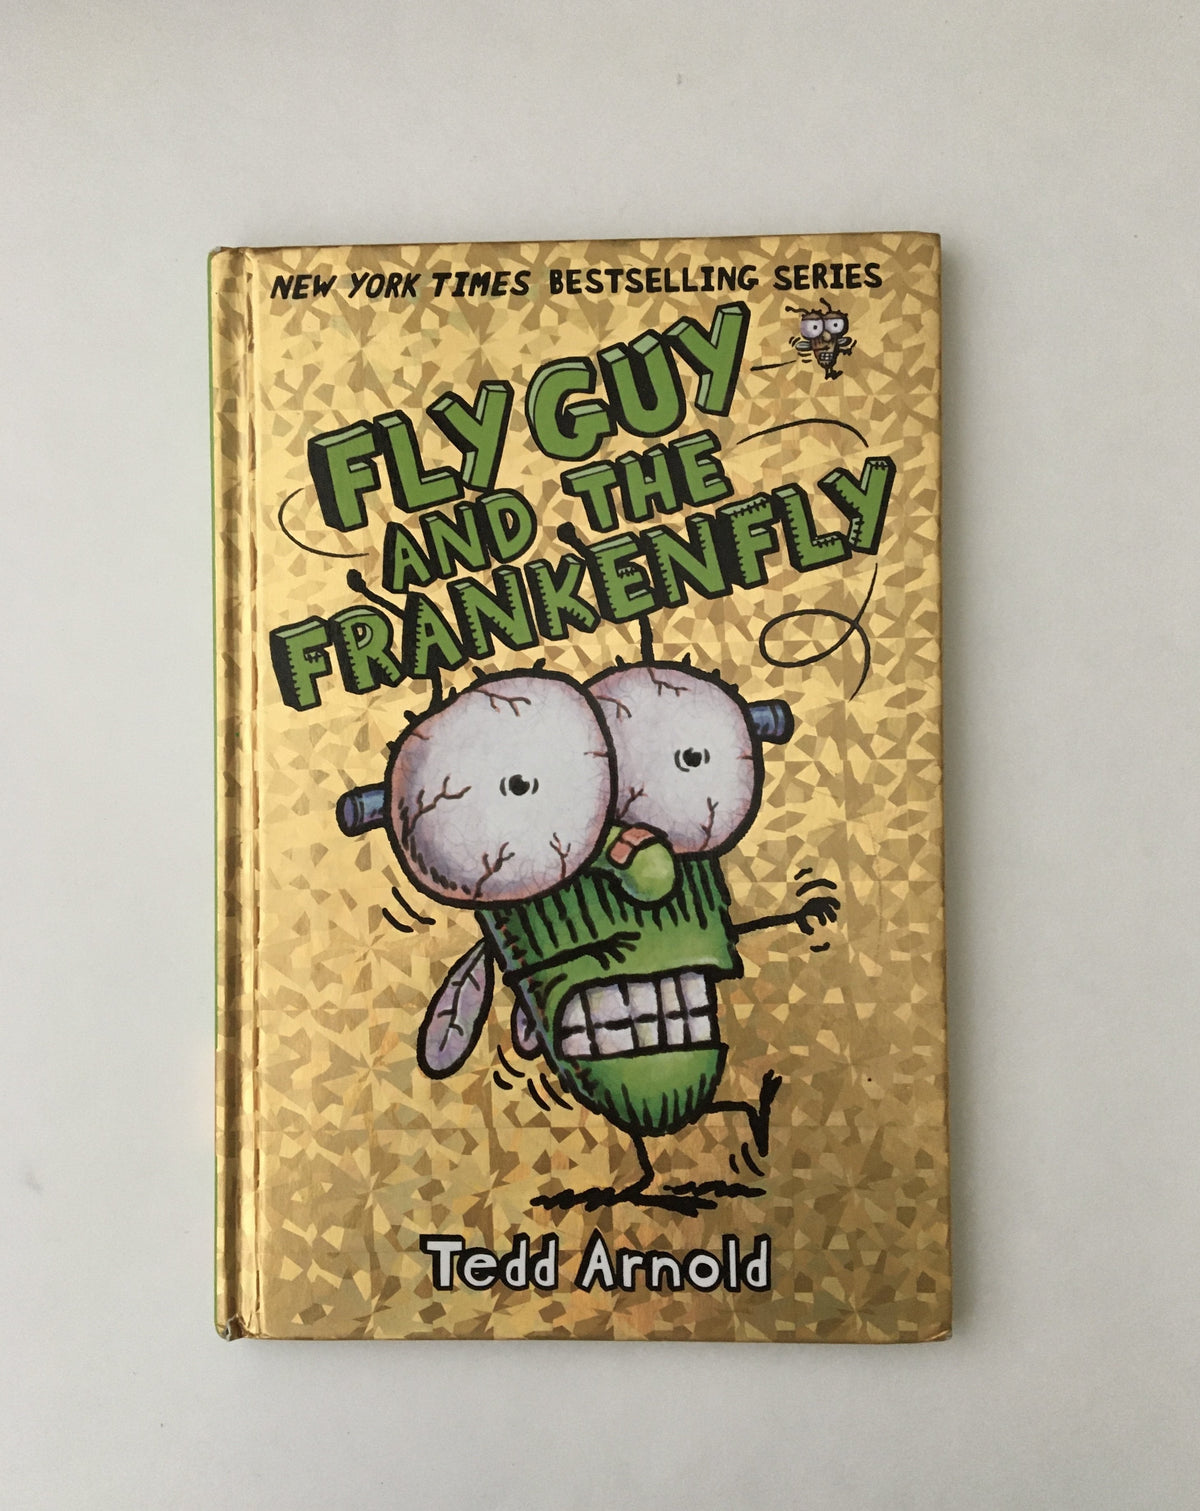 Fly Guy and the Frankenfly by Tedd Arnold